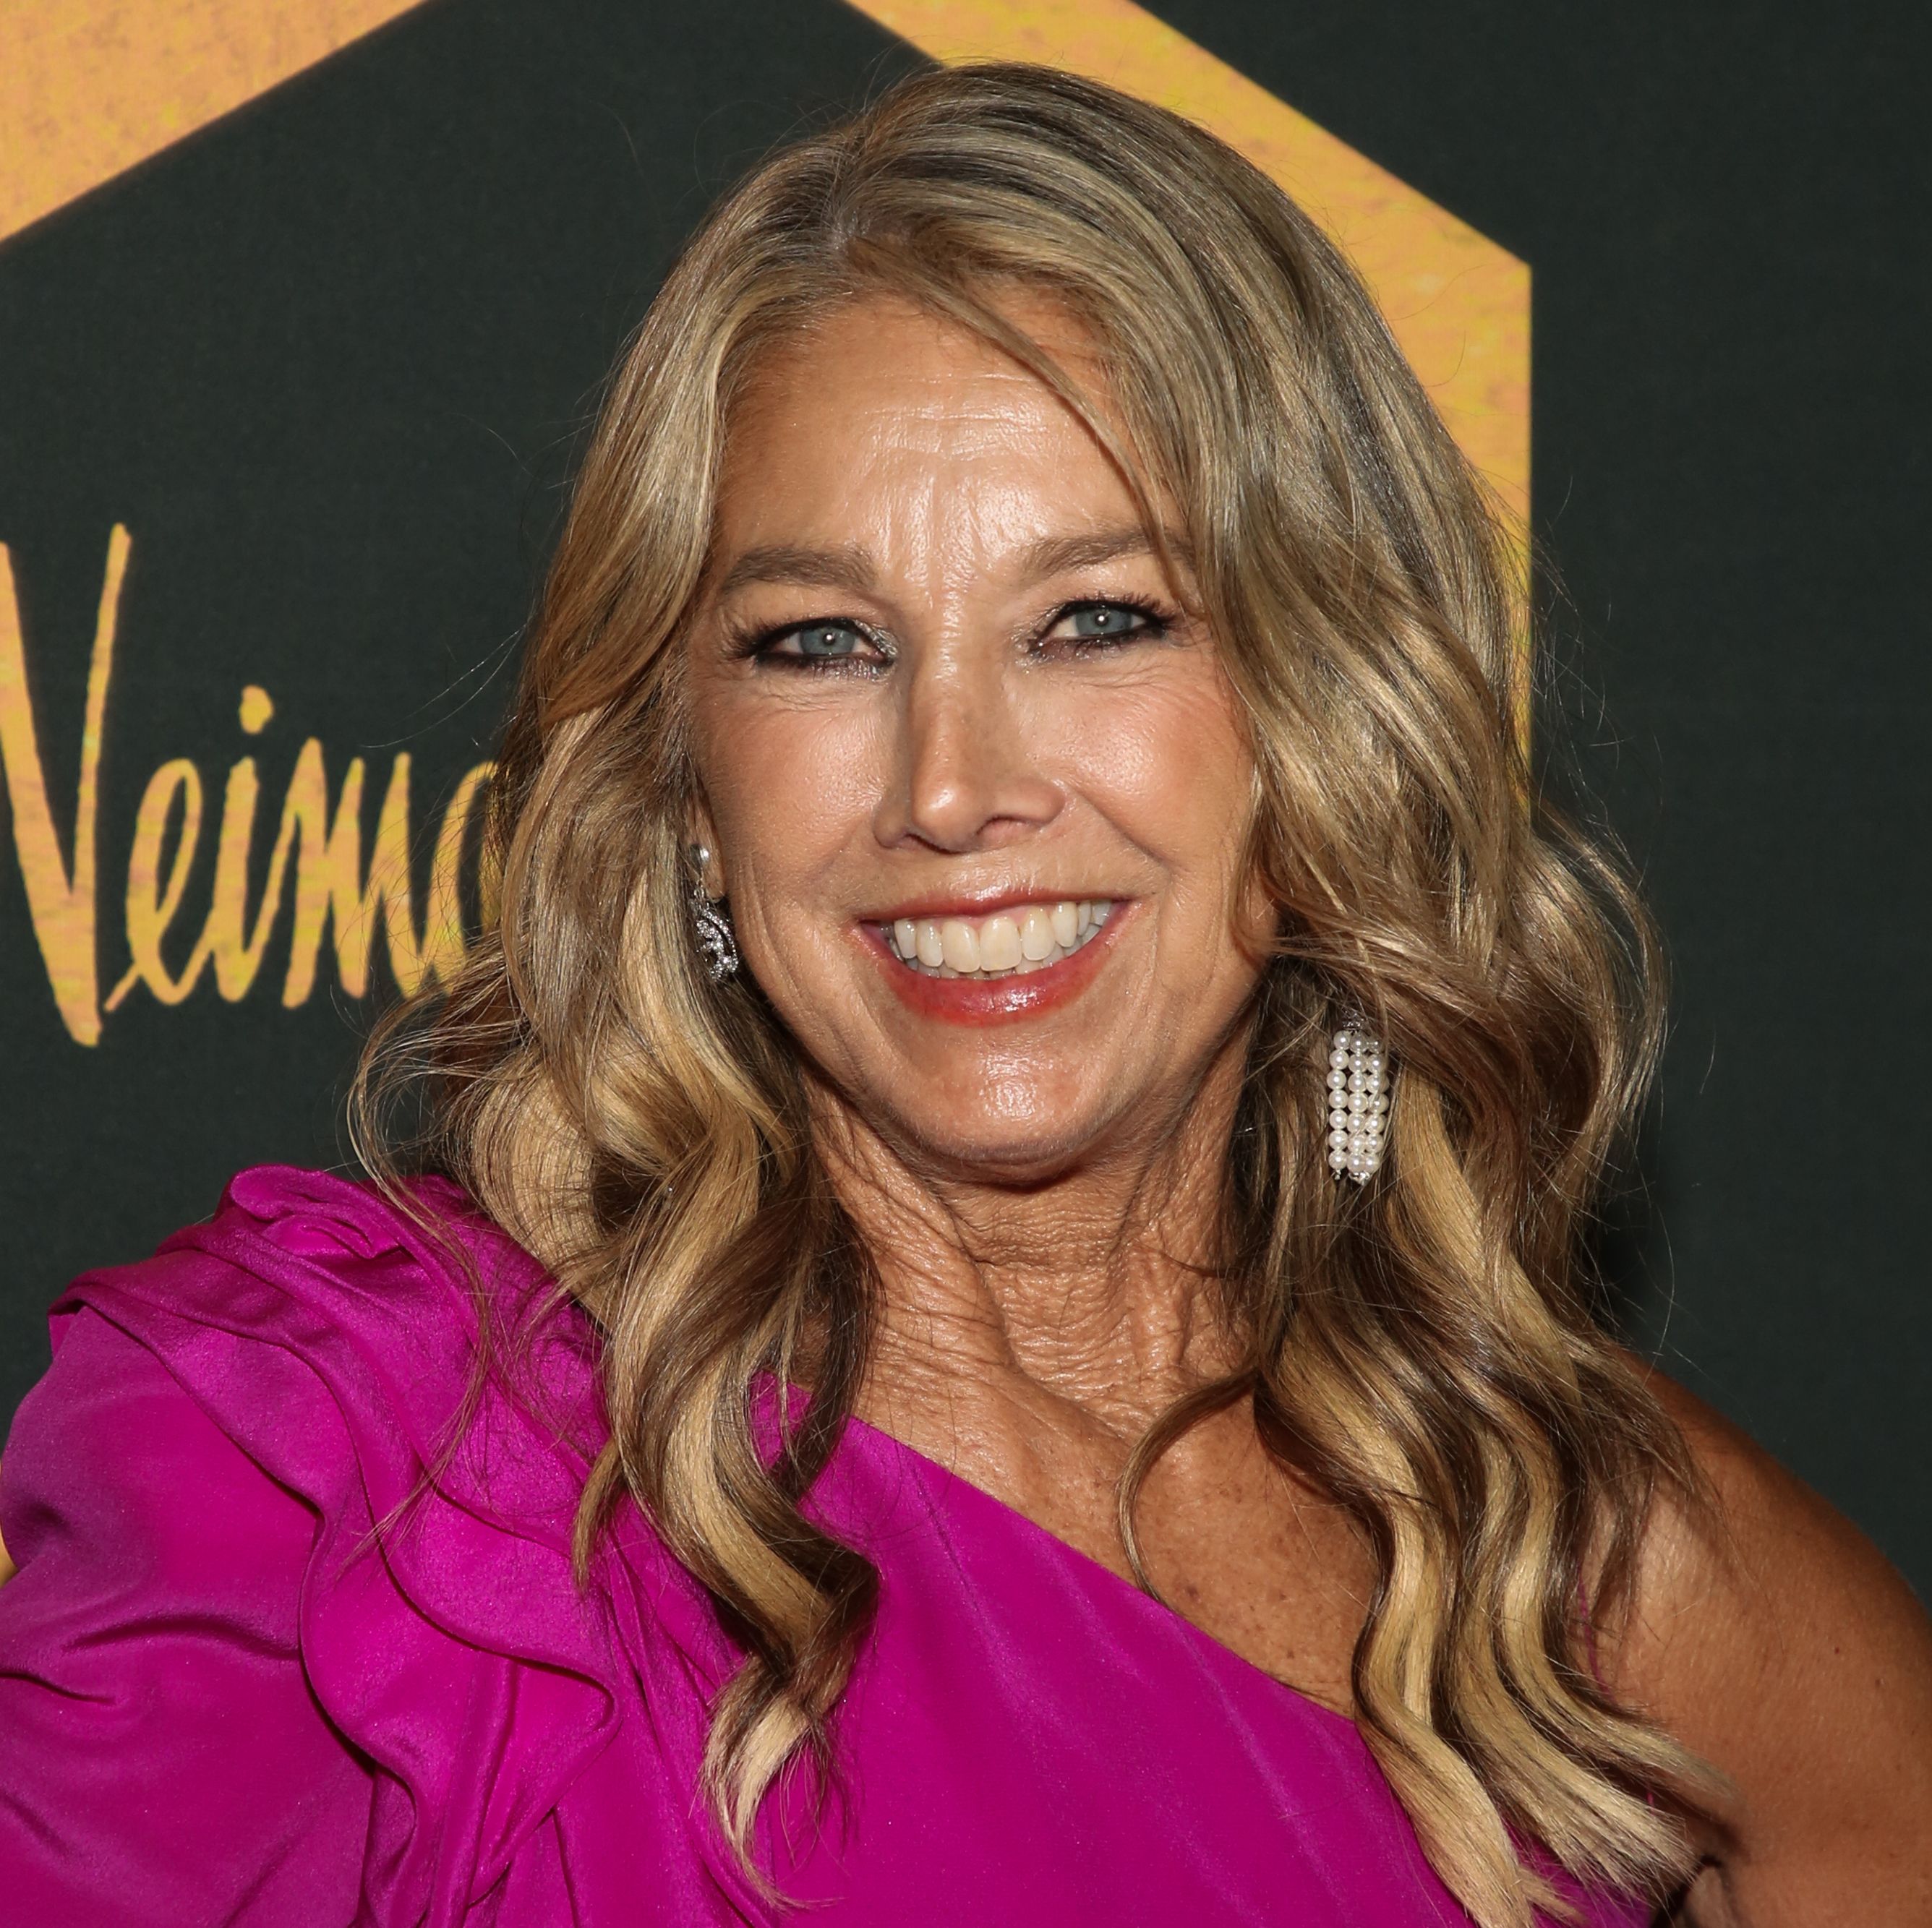 At 65, Denise Austin Is So Toned Performing ‘3 Easy’ Exercises for Women ‘Over 50’